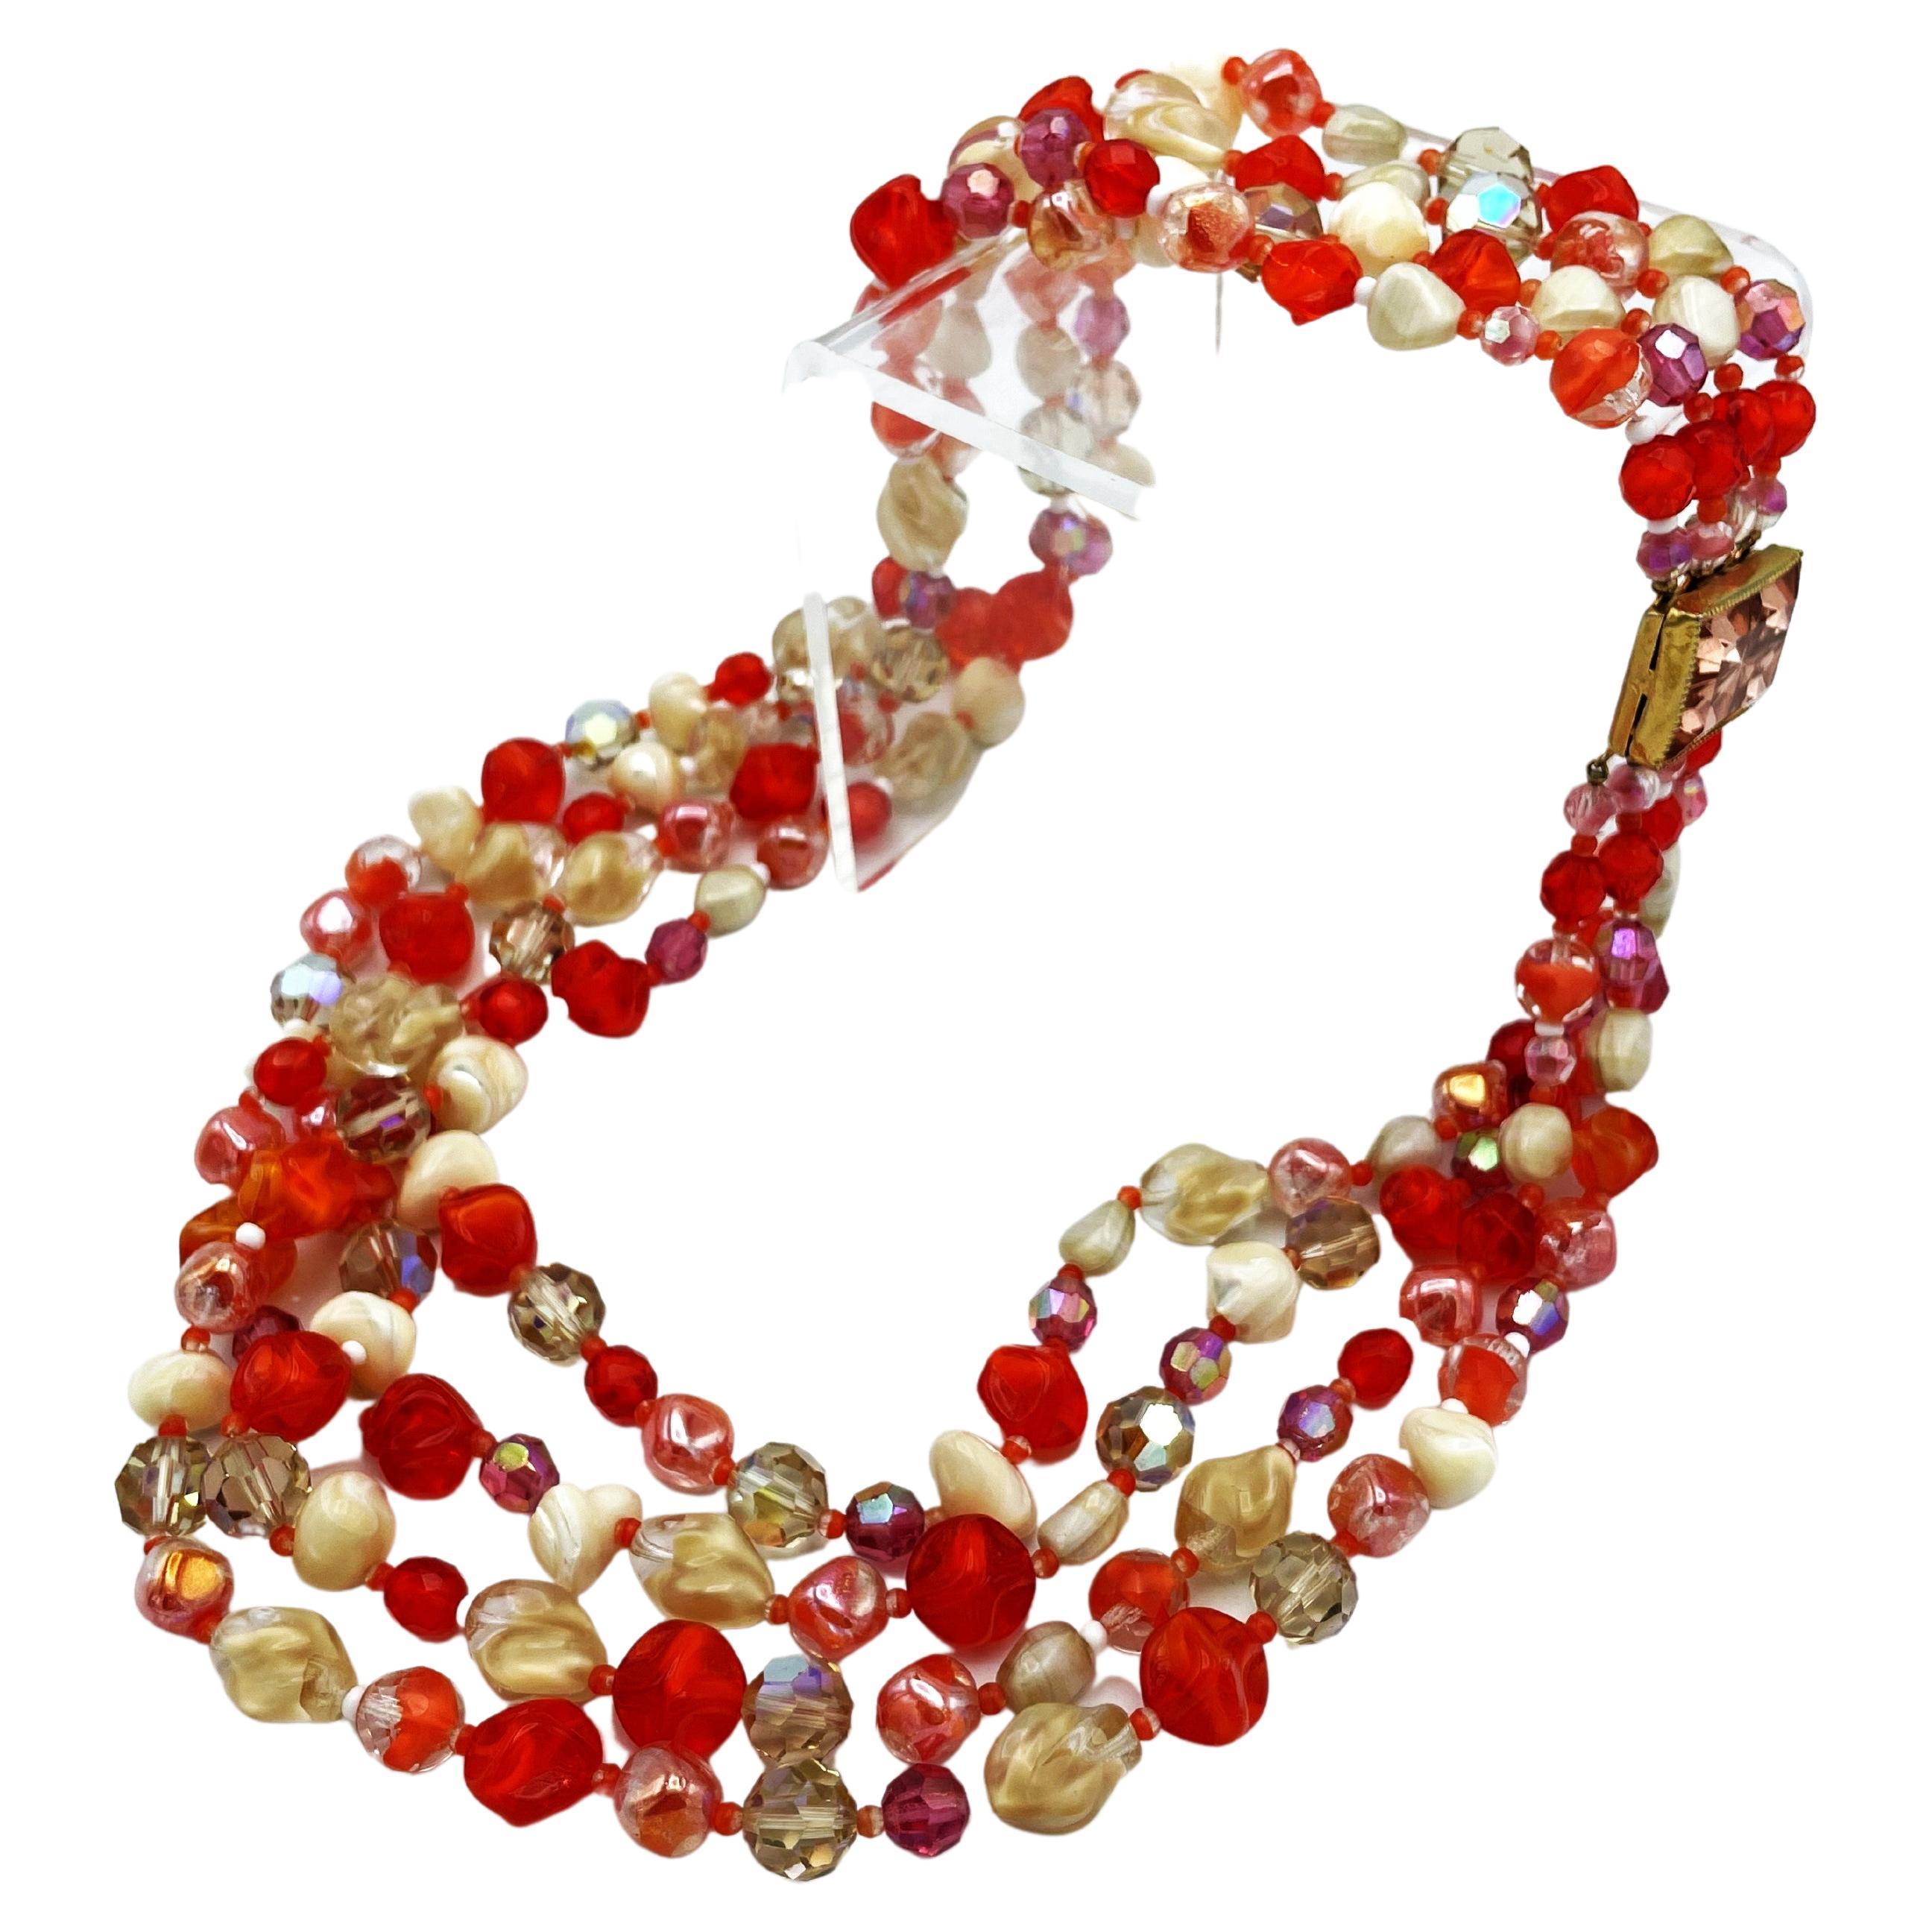 Very decorative 4 row chain with different glass beads in different beige and red  tones beads and ediffferent shapes.  Nice closure in pink.
Hattie Carnegie, born Henrietta Kanengeiser, was an Austrian-American jewelry and fashion designer of the